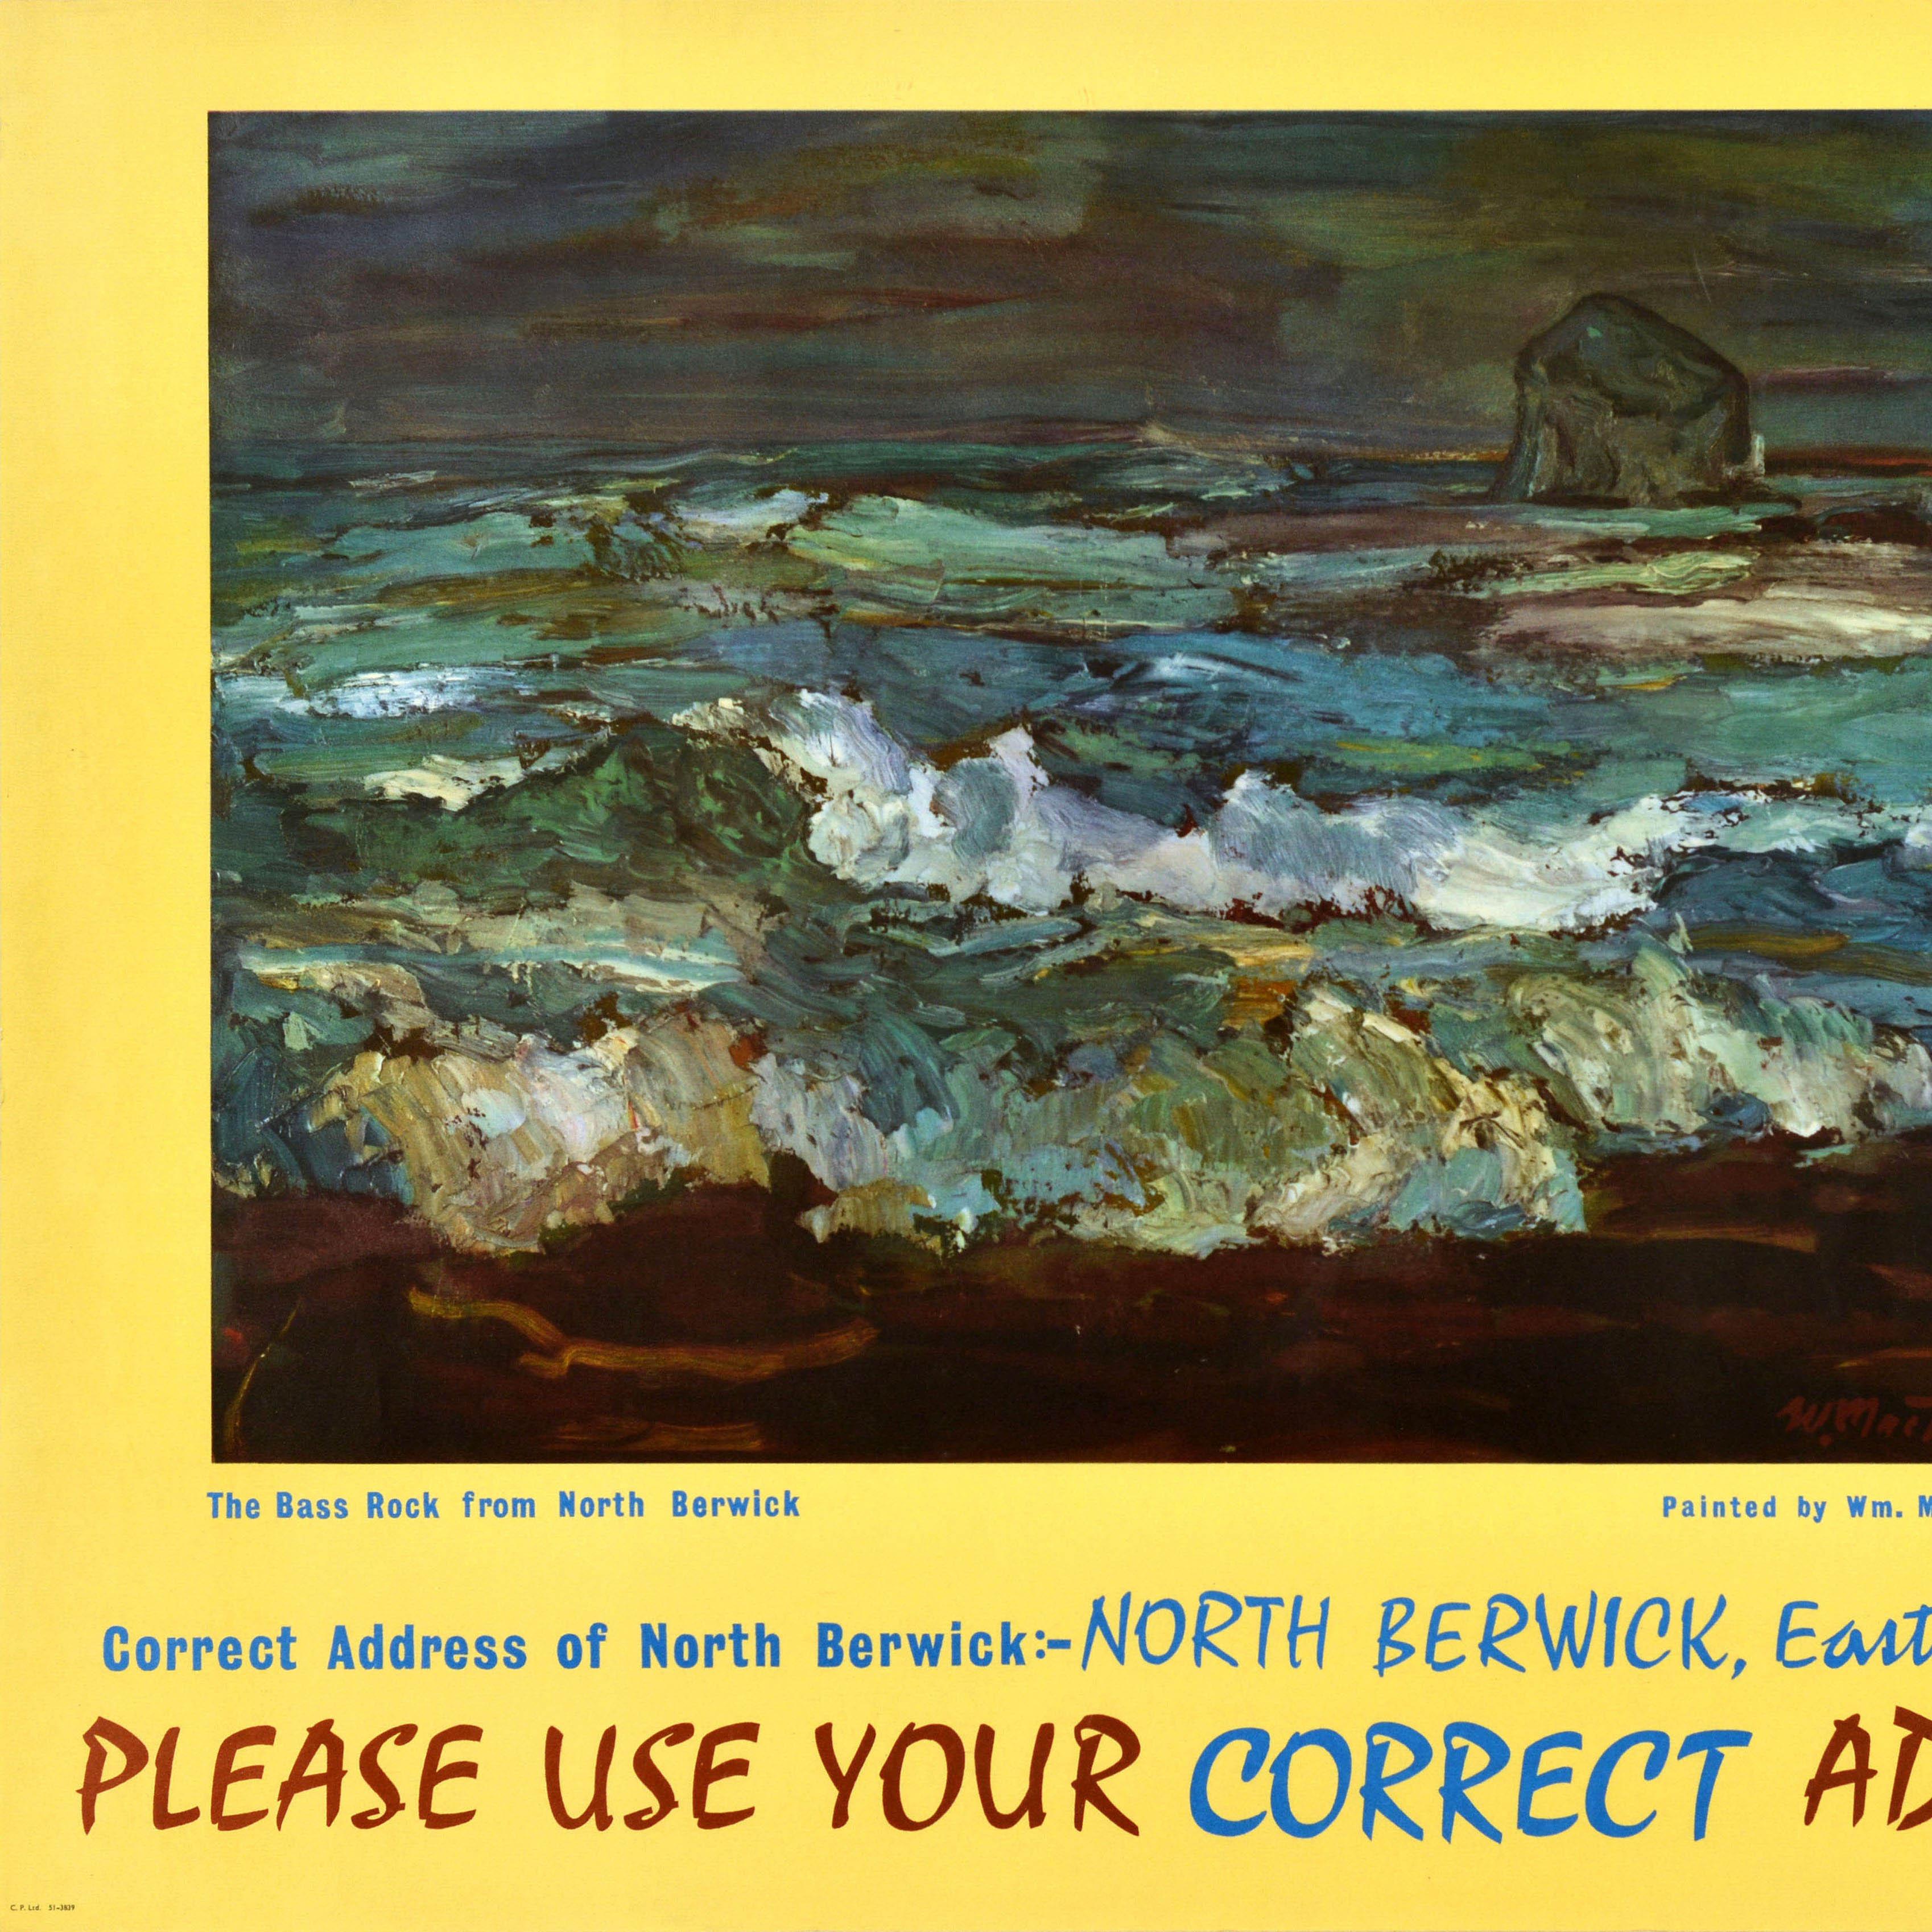 Original vintage General Post Office poster - Correct Address of North Berwick, East Lothian Please Use Your Correct Address - featuring a painting of The Bass Rock from North Berwick by the Scottish artist William McTaggart (1903-1981) depicting